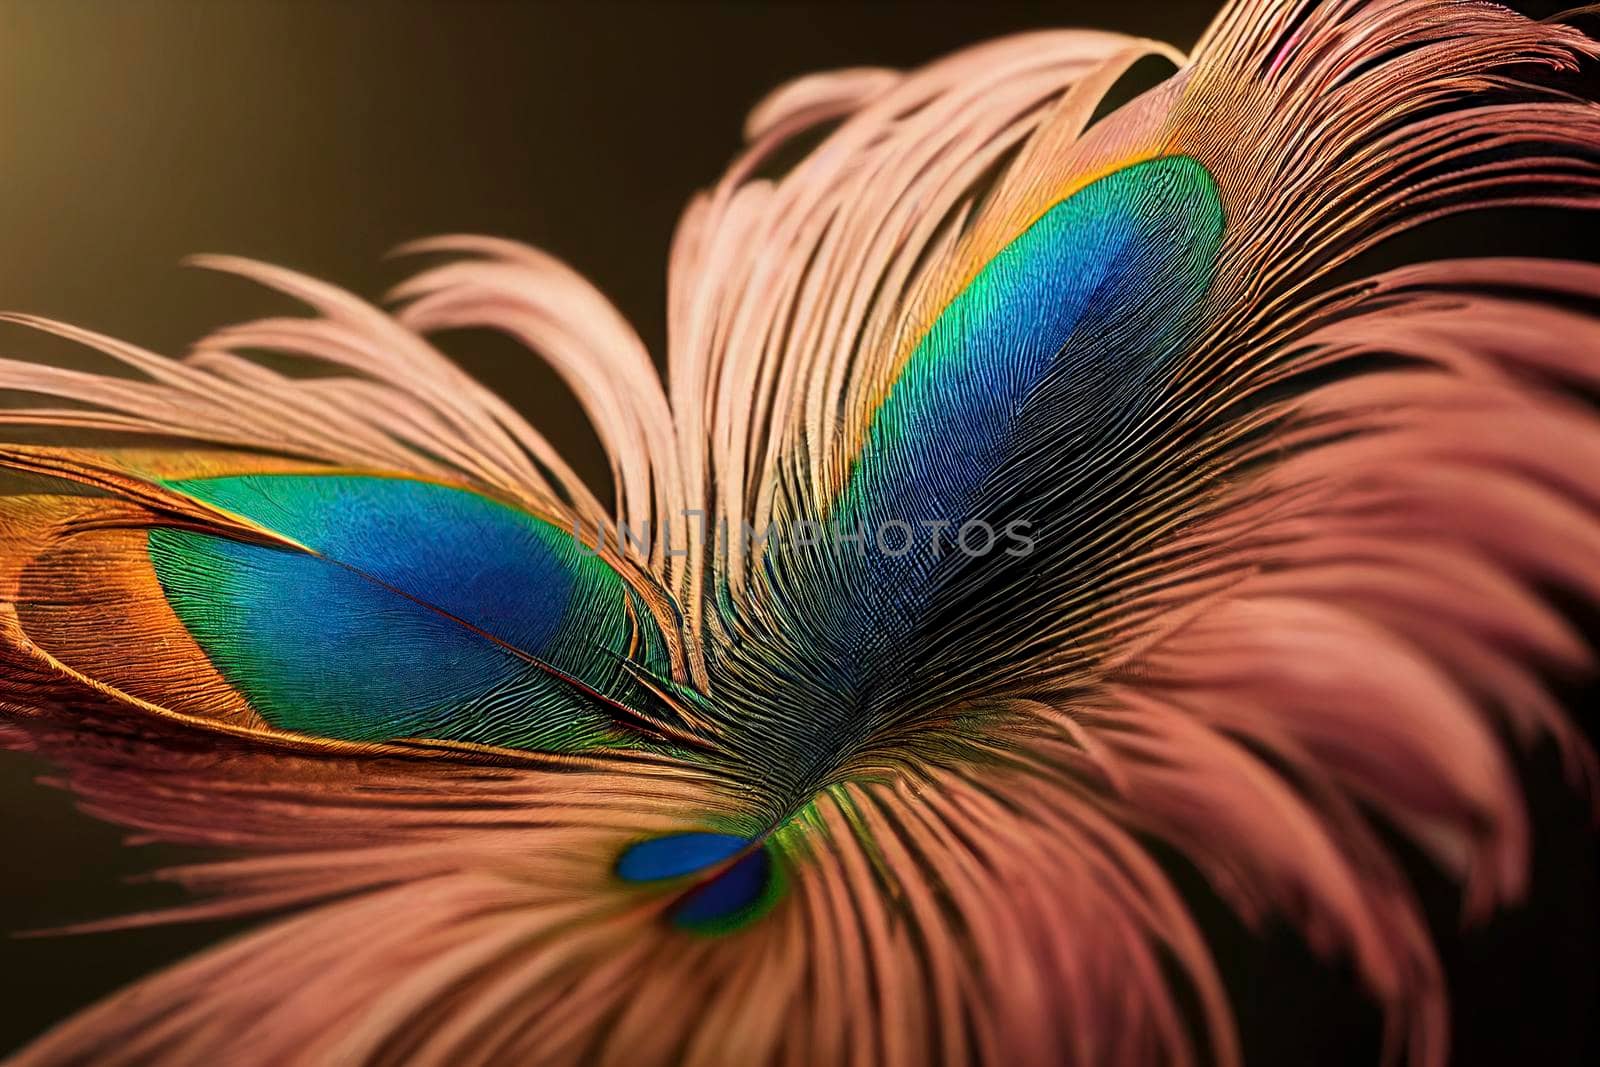 Close-up Peacocks, colorful details and beautiful peacock feathers